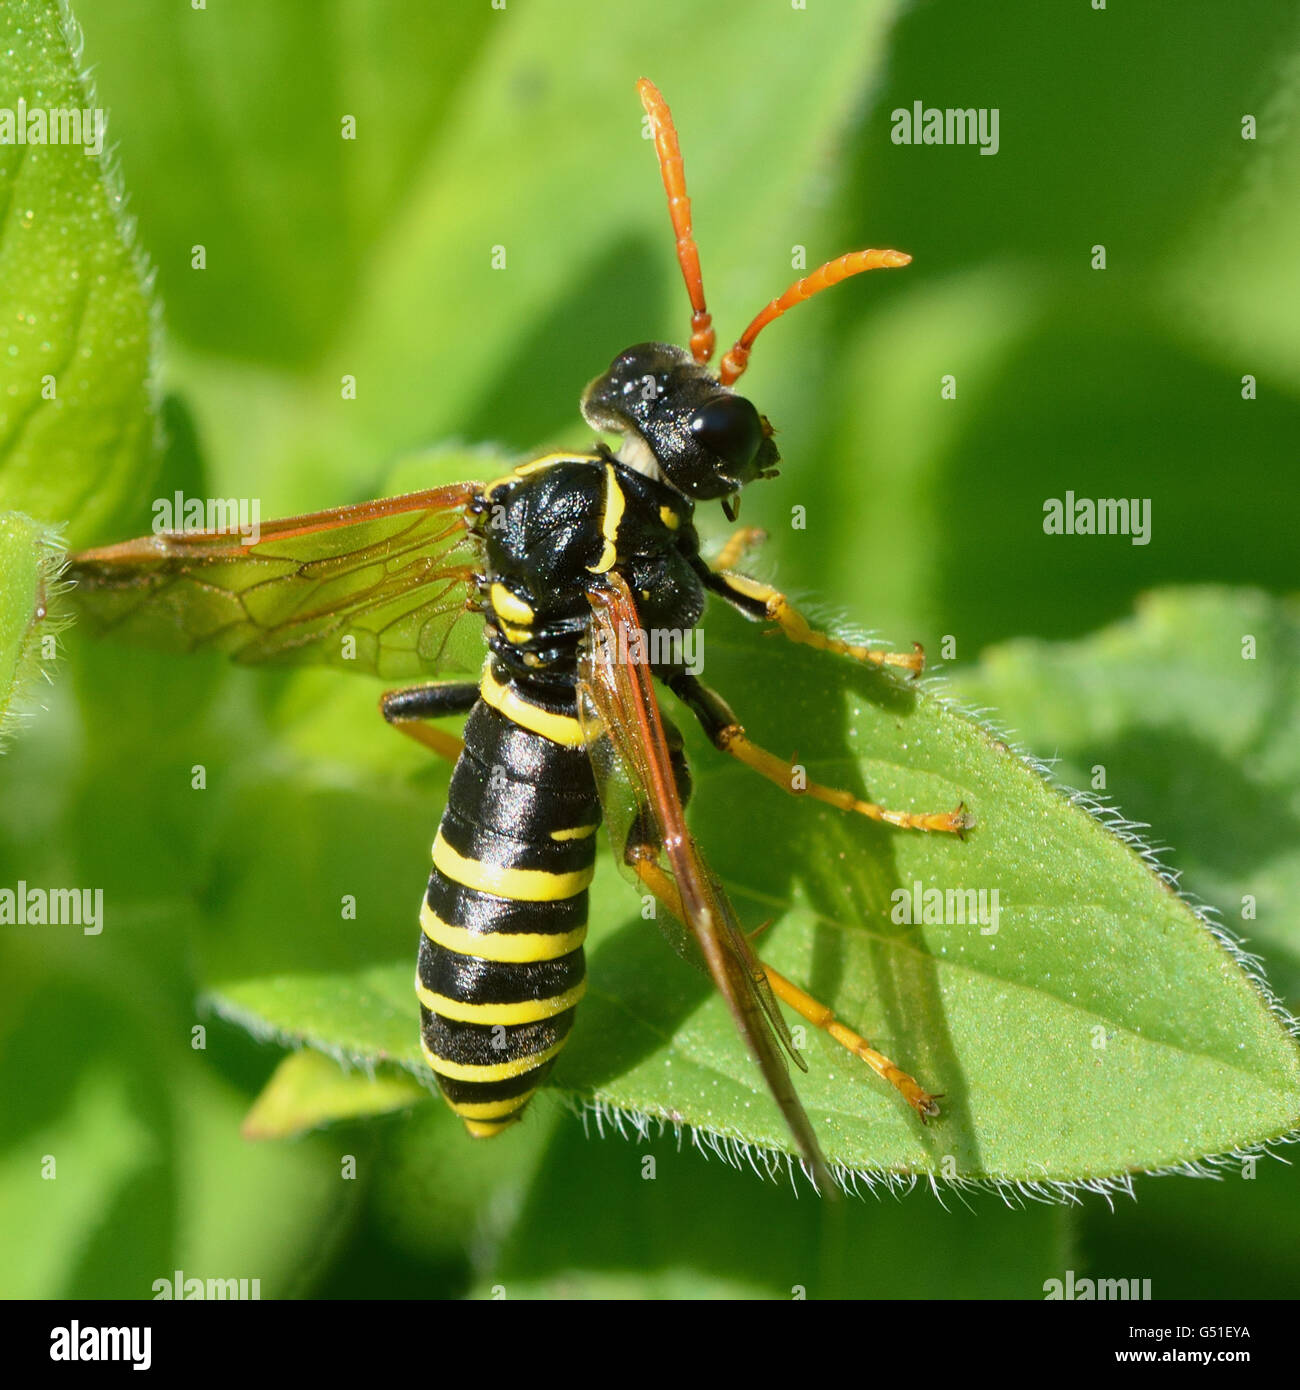 Figwort sawfly (Tenthredo scrophulariae). Insect in family Tenthredinidae, with yellow and black abdomen and orange antennae Stock Photo